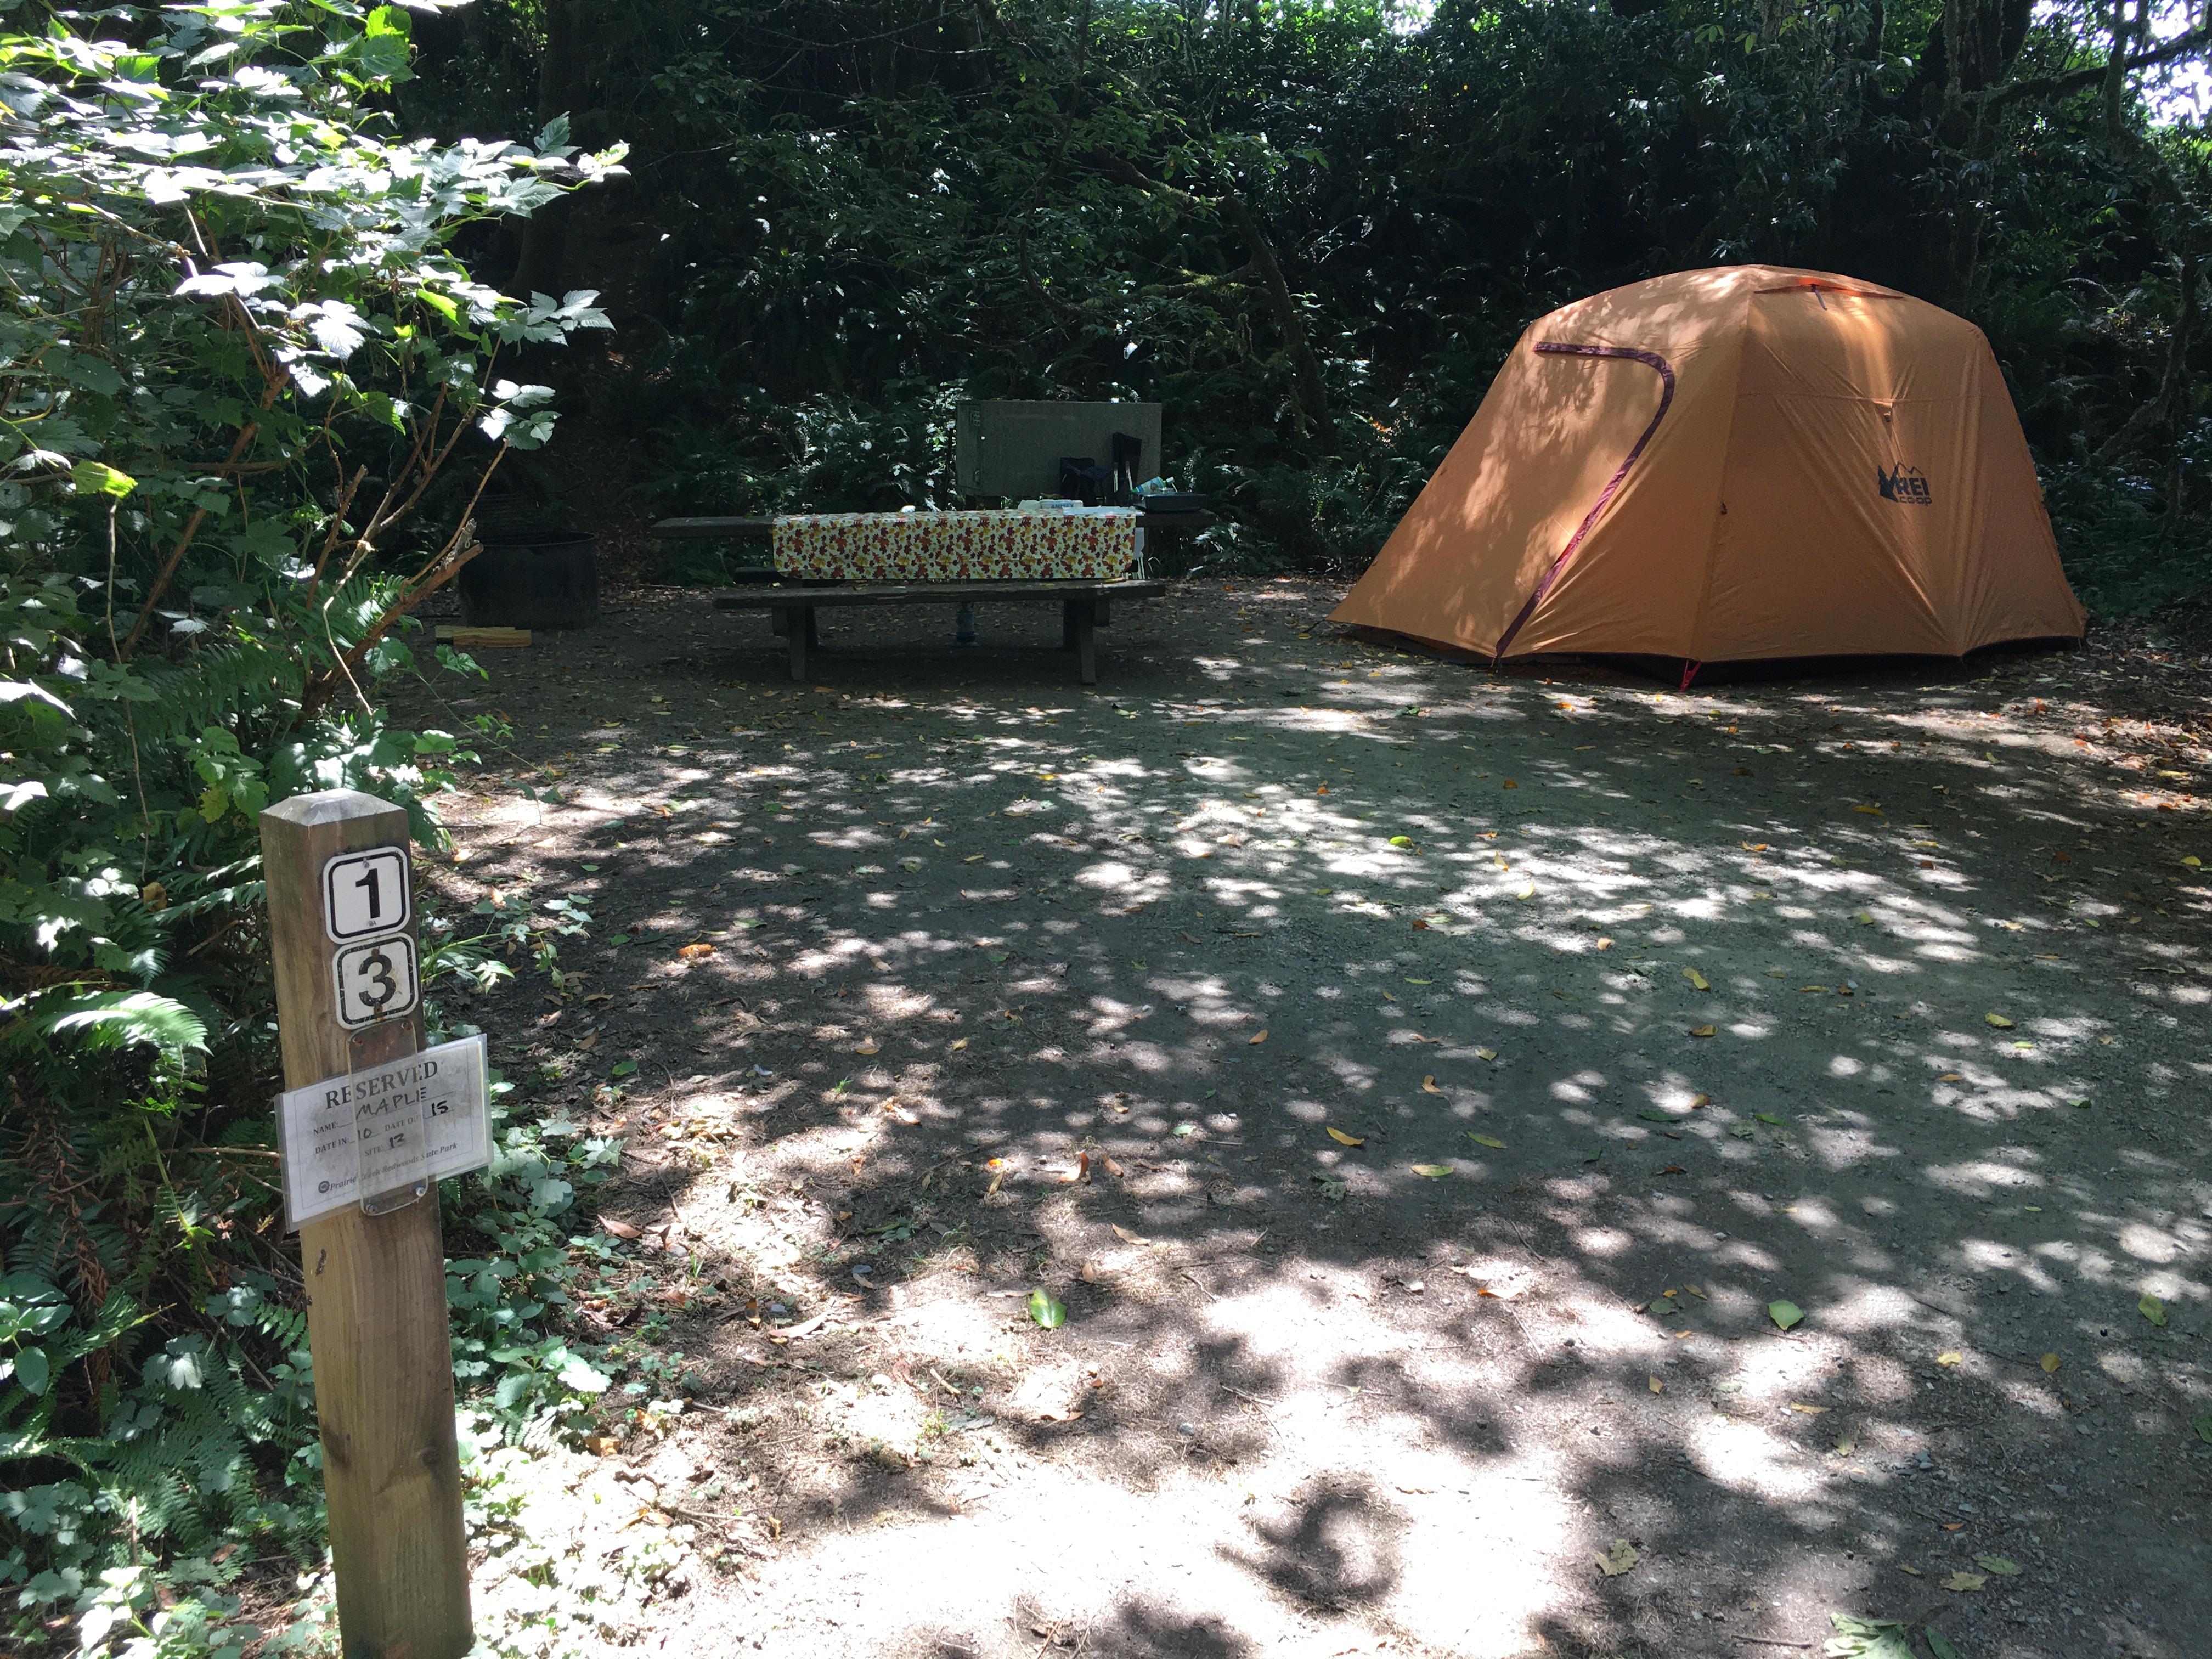 A tent and picnic table in the shade.